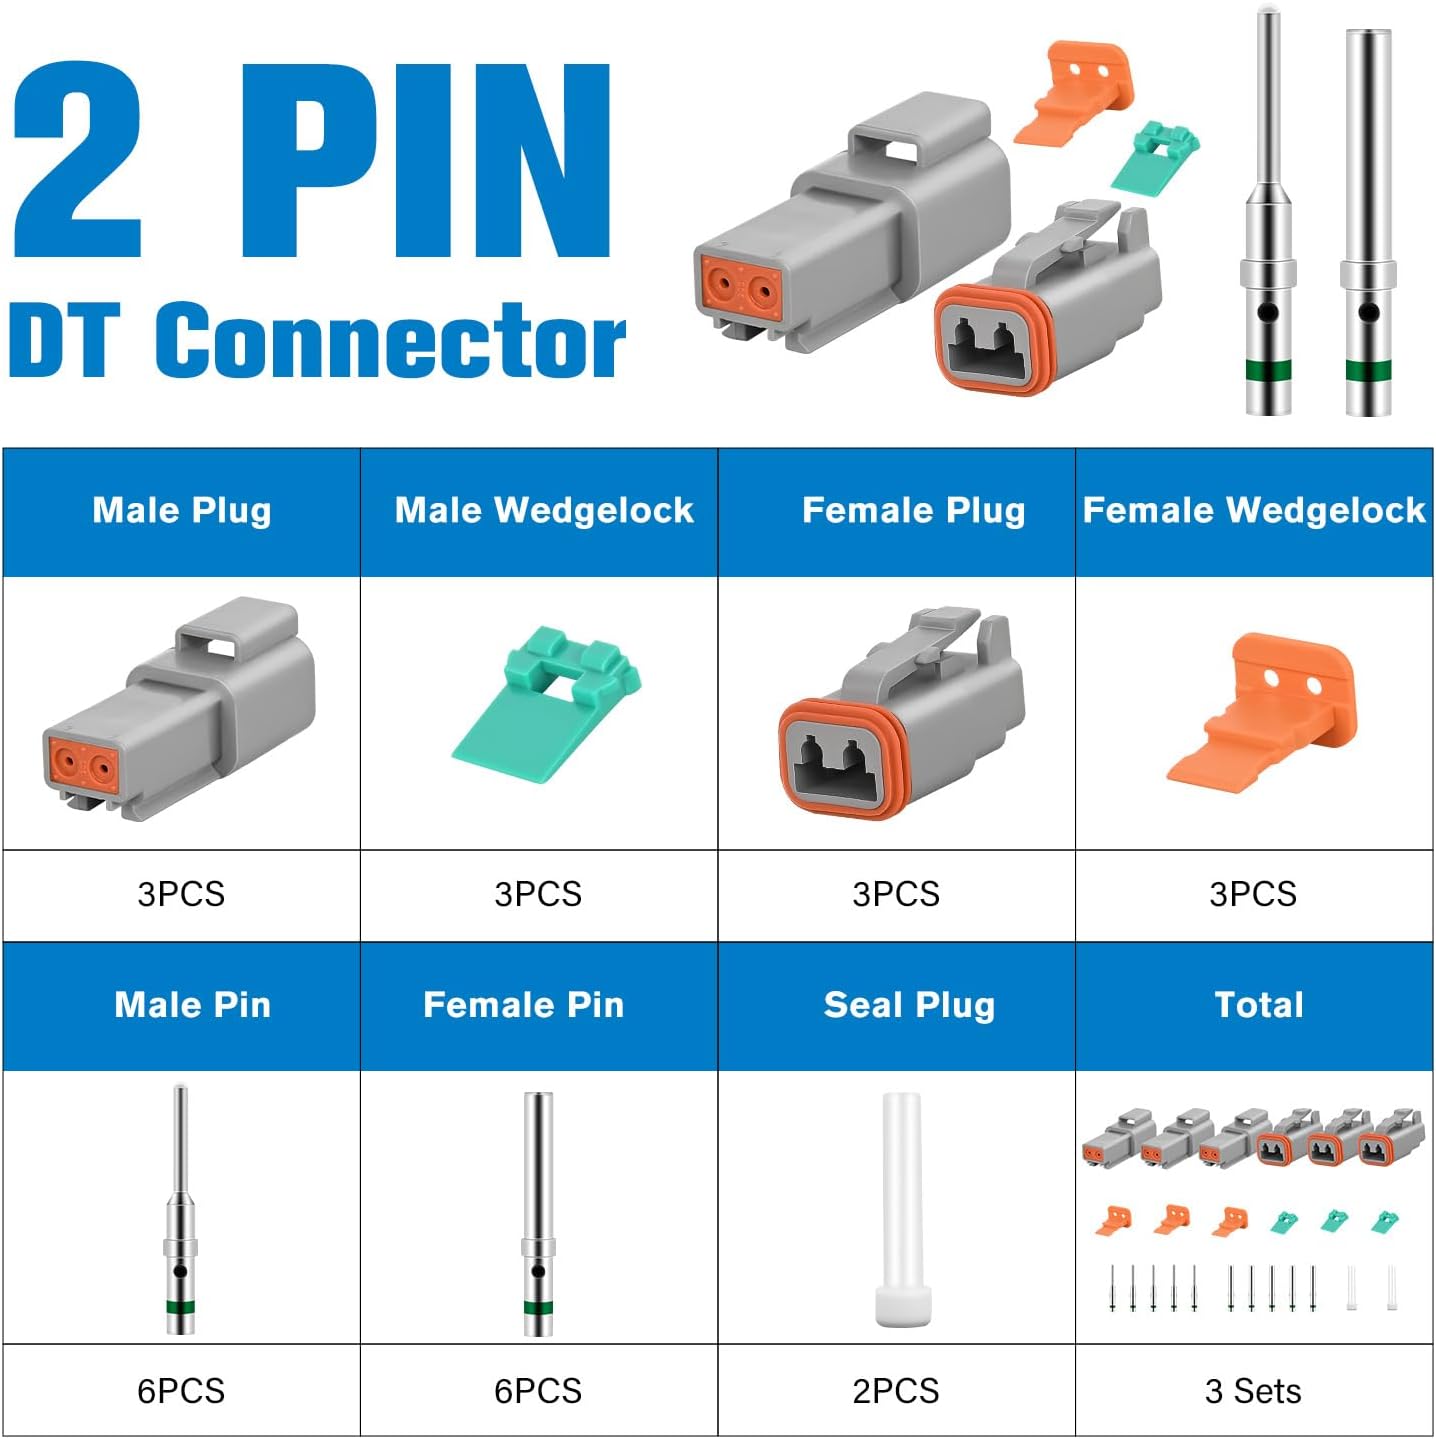 2 PIN DT Connector Kit 3 Sets Size 16 Solid Contacts Waterproof Male Female Terminal for 14-20 AWG DT Series Connector nilight